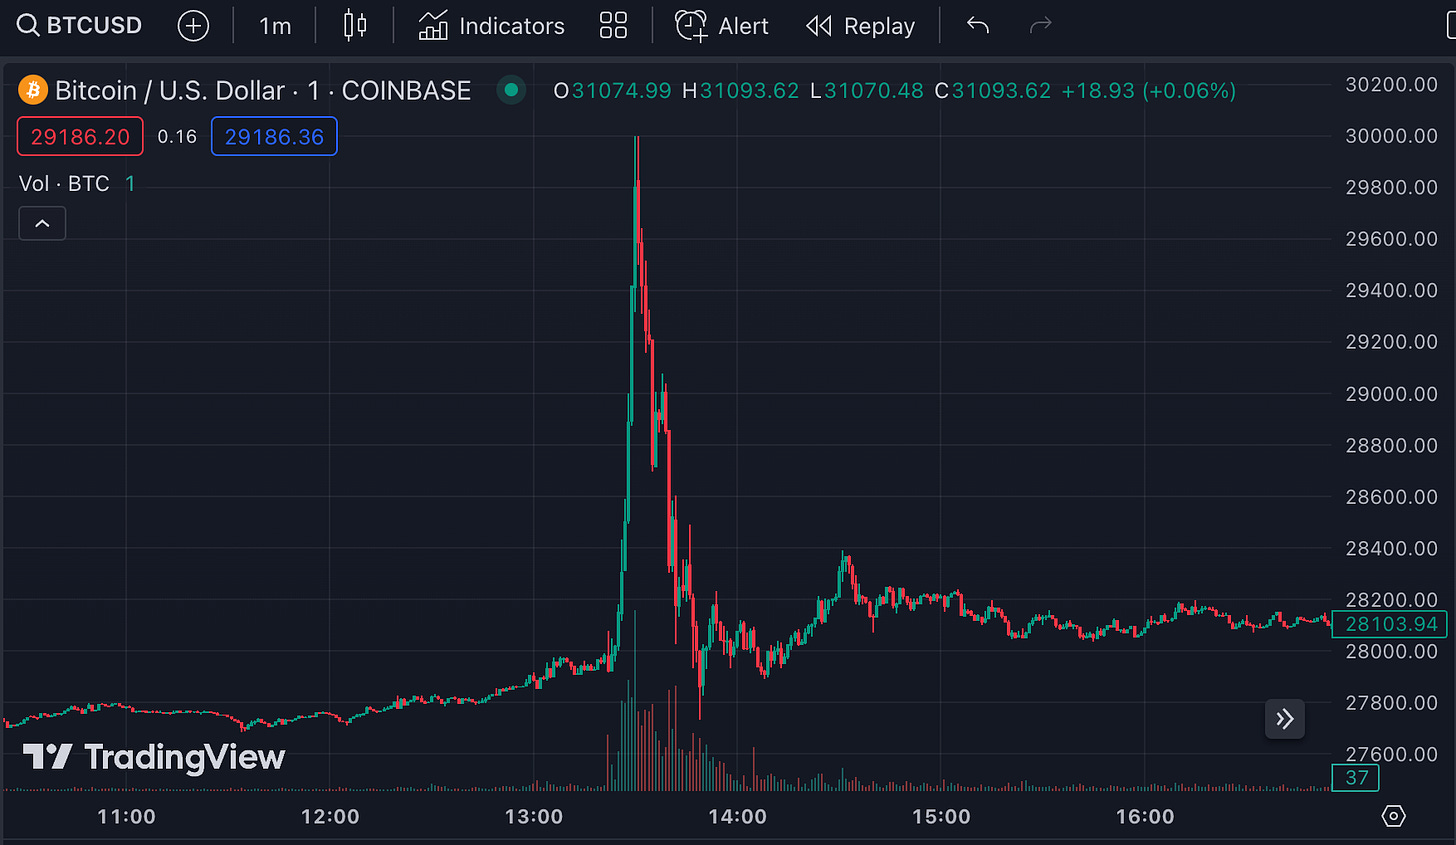 A sudden spike and then rapid decrease in the price of Bitcoin, from just under $28,000 to $30,000 and then back to around $28,000